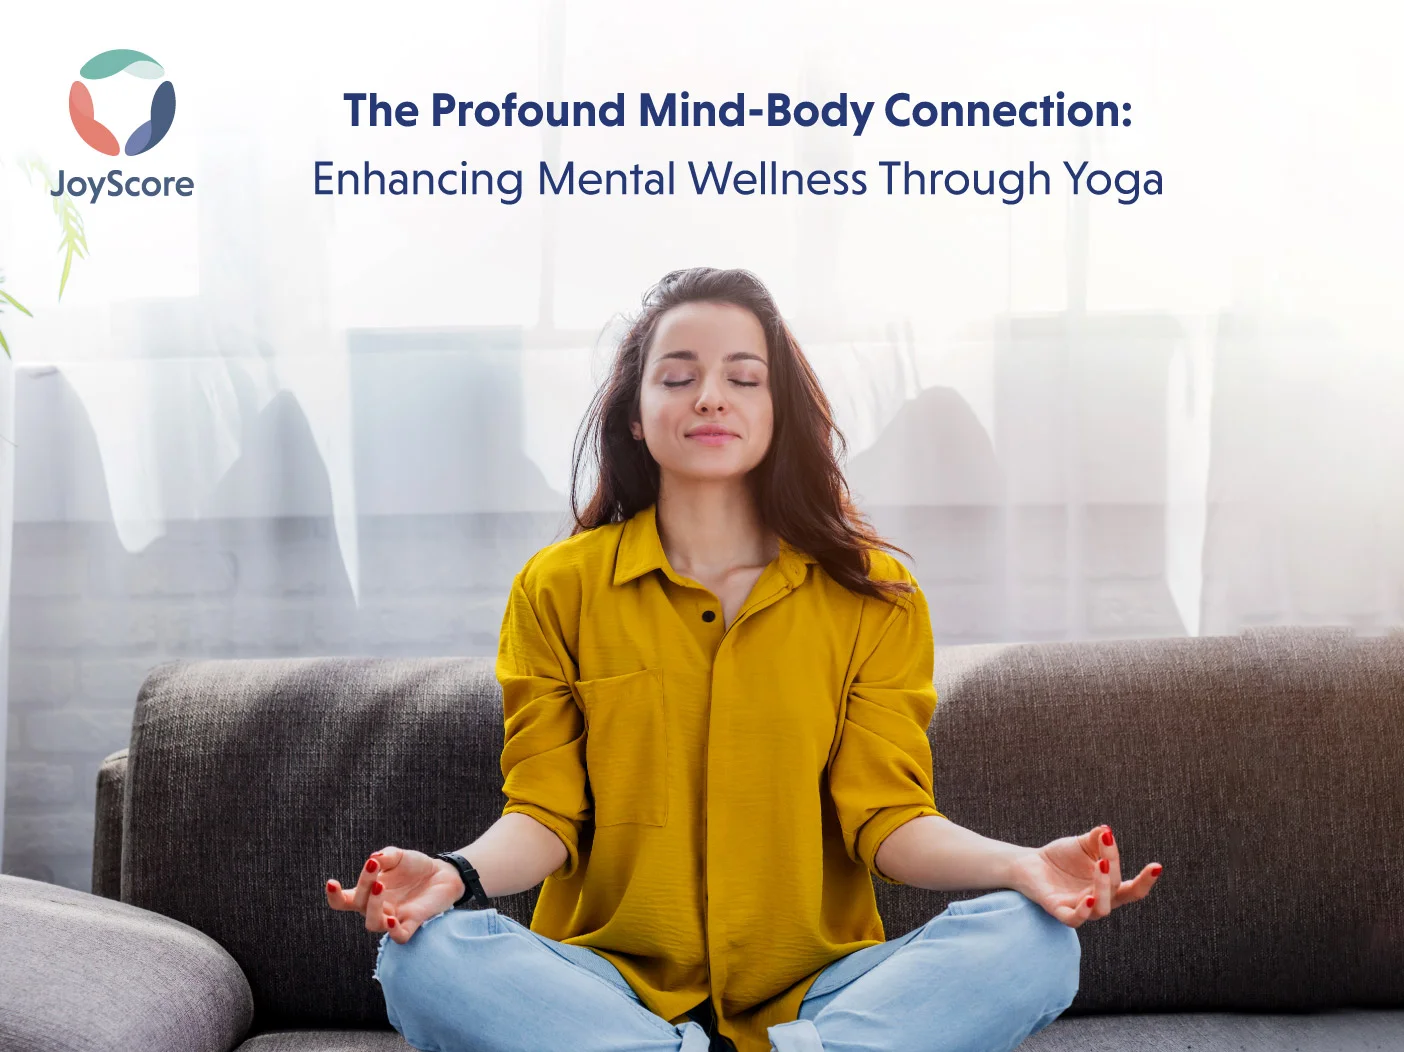 The Profound Mind-body Connection: Enhancing Mental Wellness Through Yoga